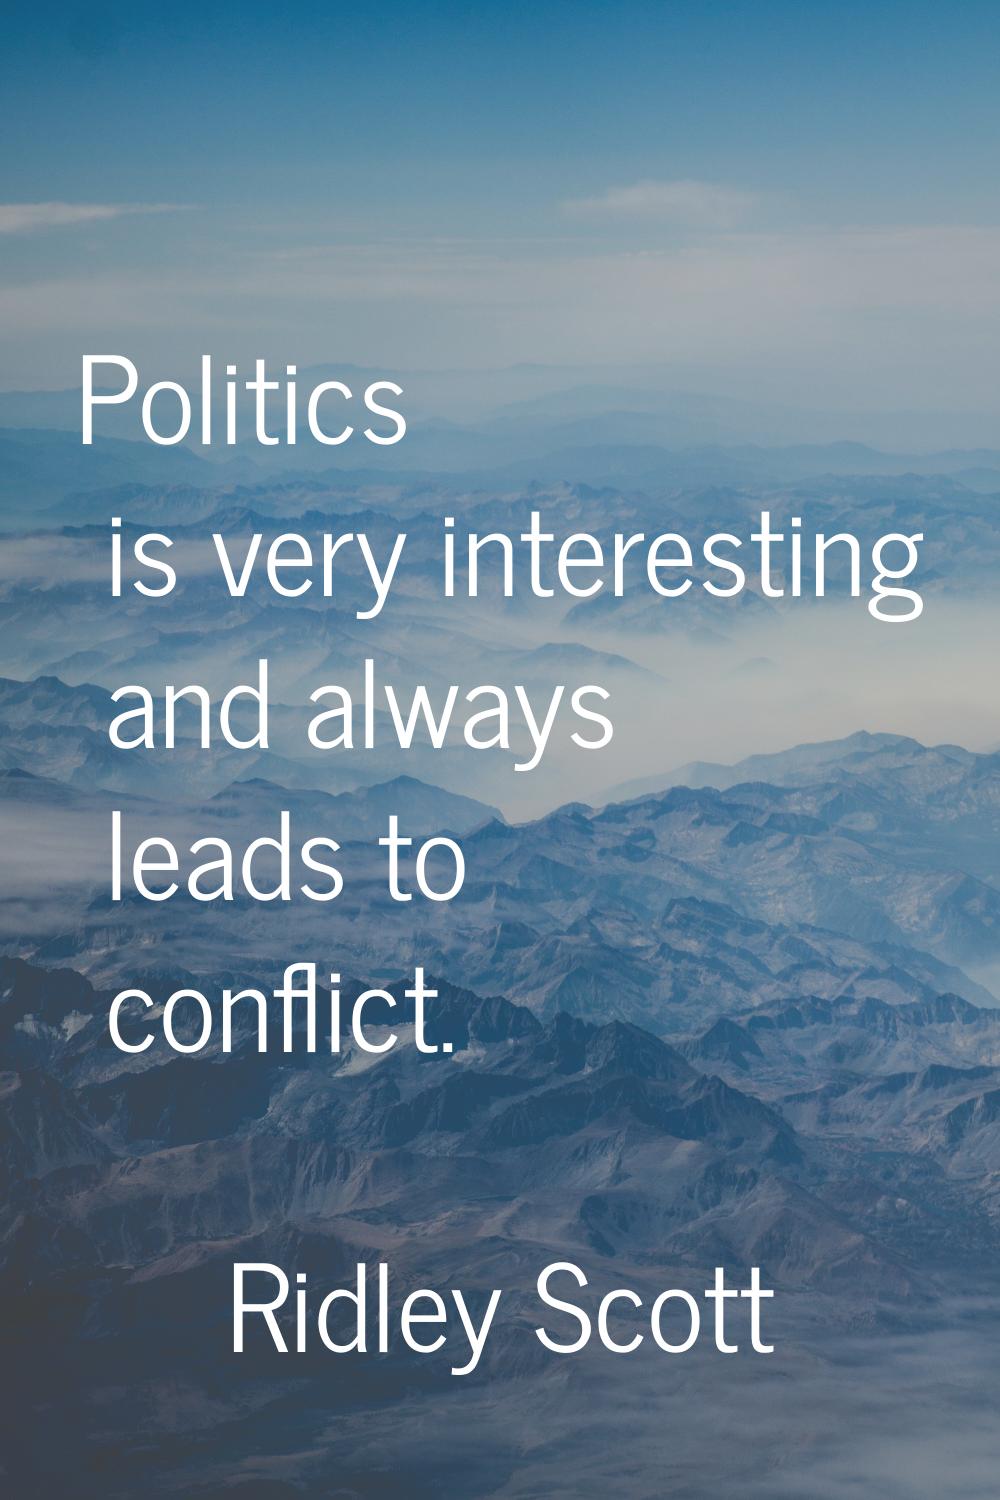 Politics is very interesting and always leads to conflict.